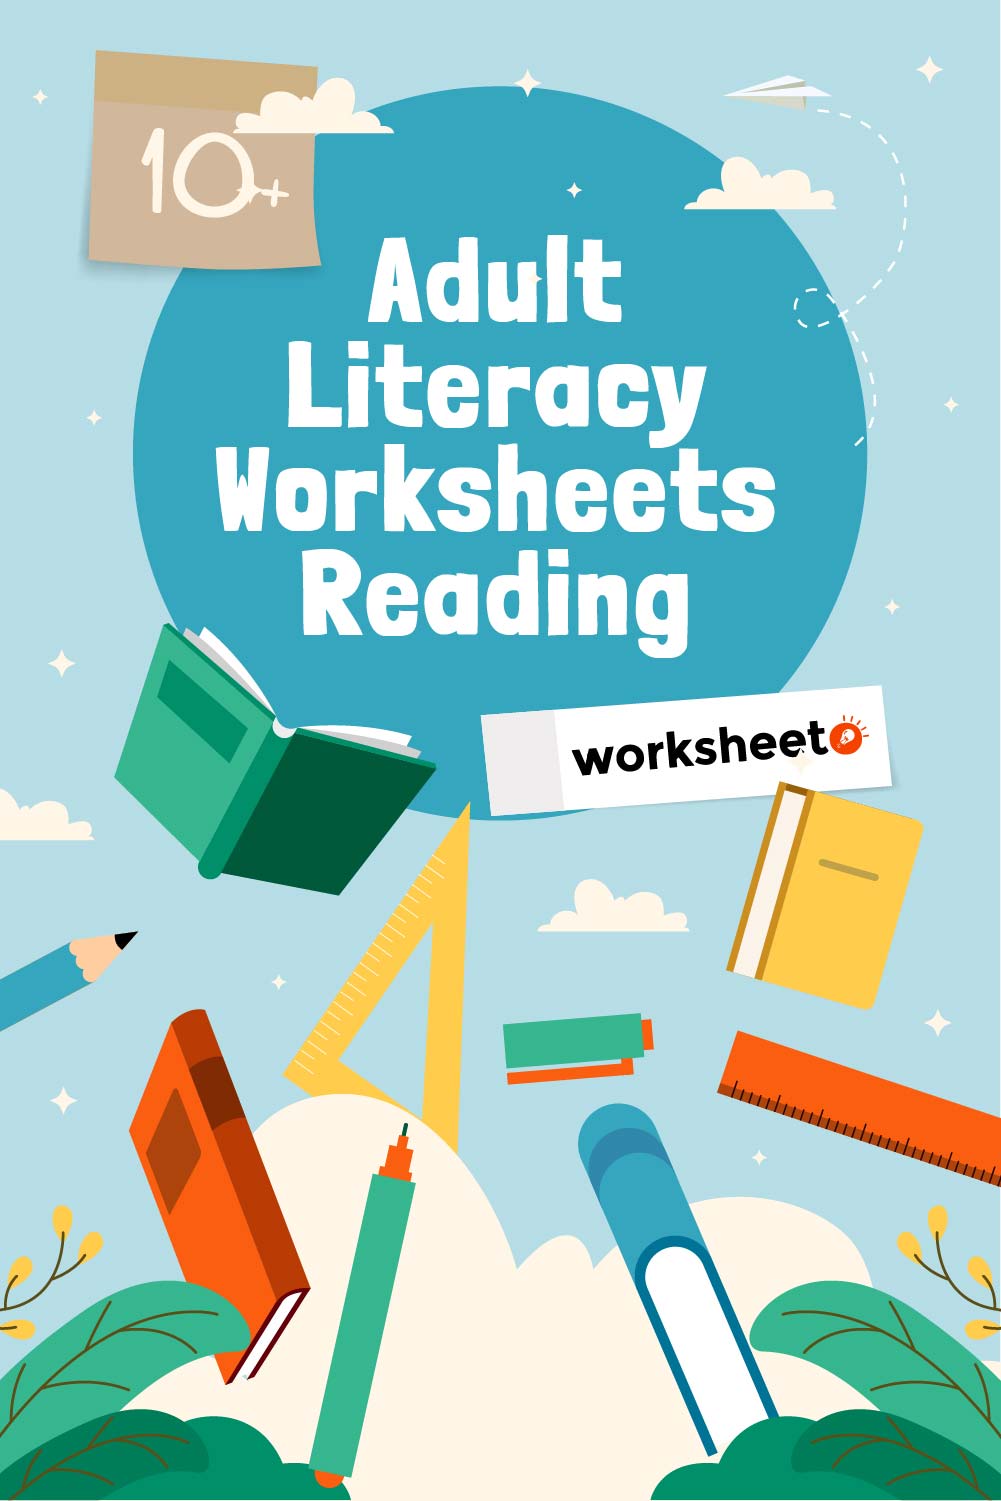 18 Images of Adult Literacy Worksheets Reading